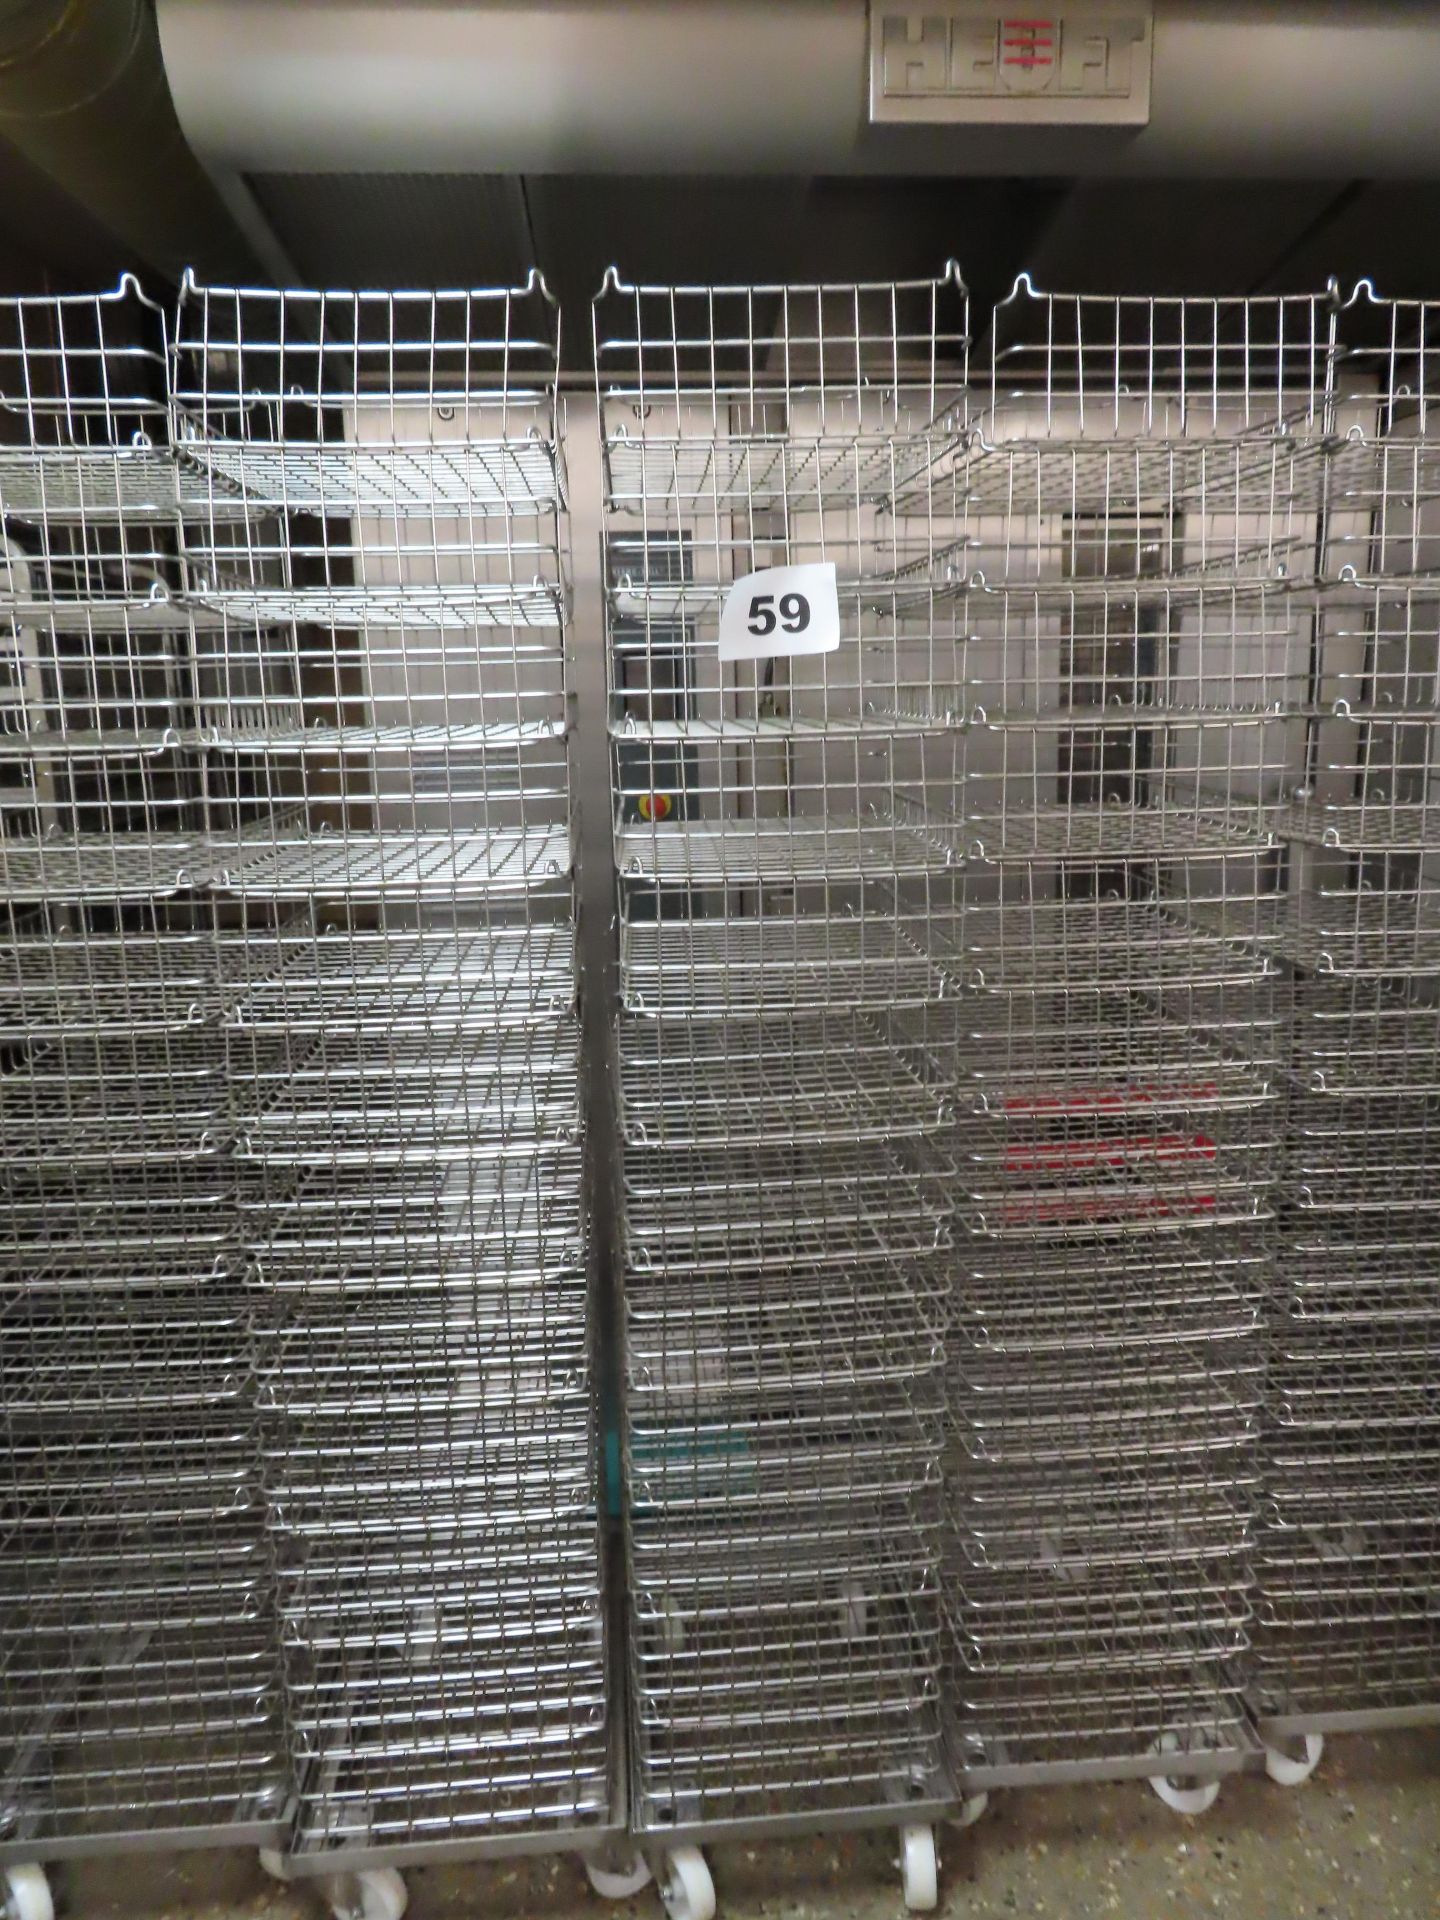 5 X DOLLIES CONTAINING 12 WIRE BASKETS PER DOLLY. TOTAL 60 TRAYS.